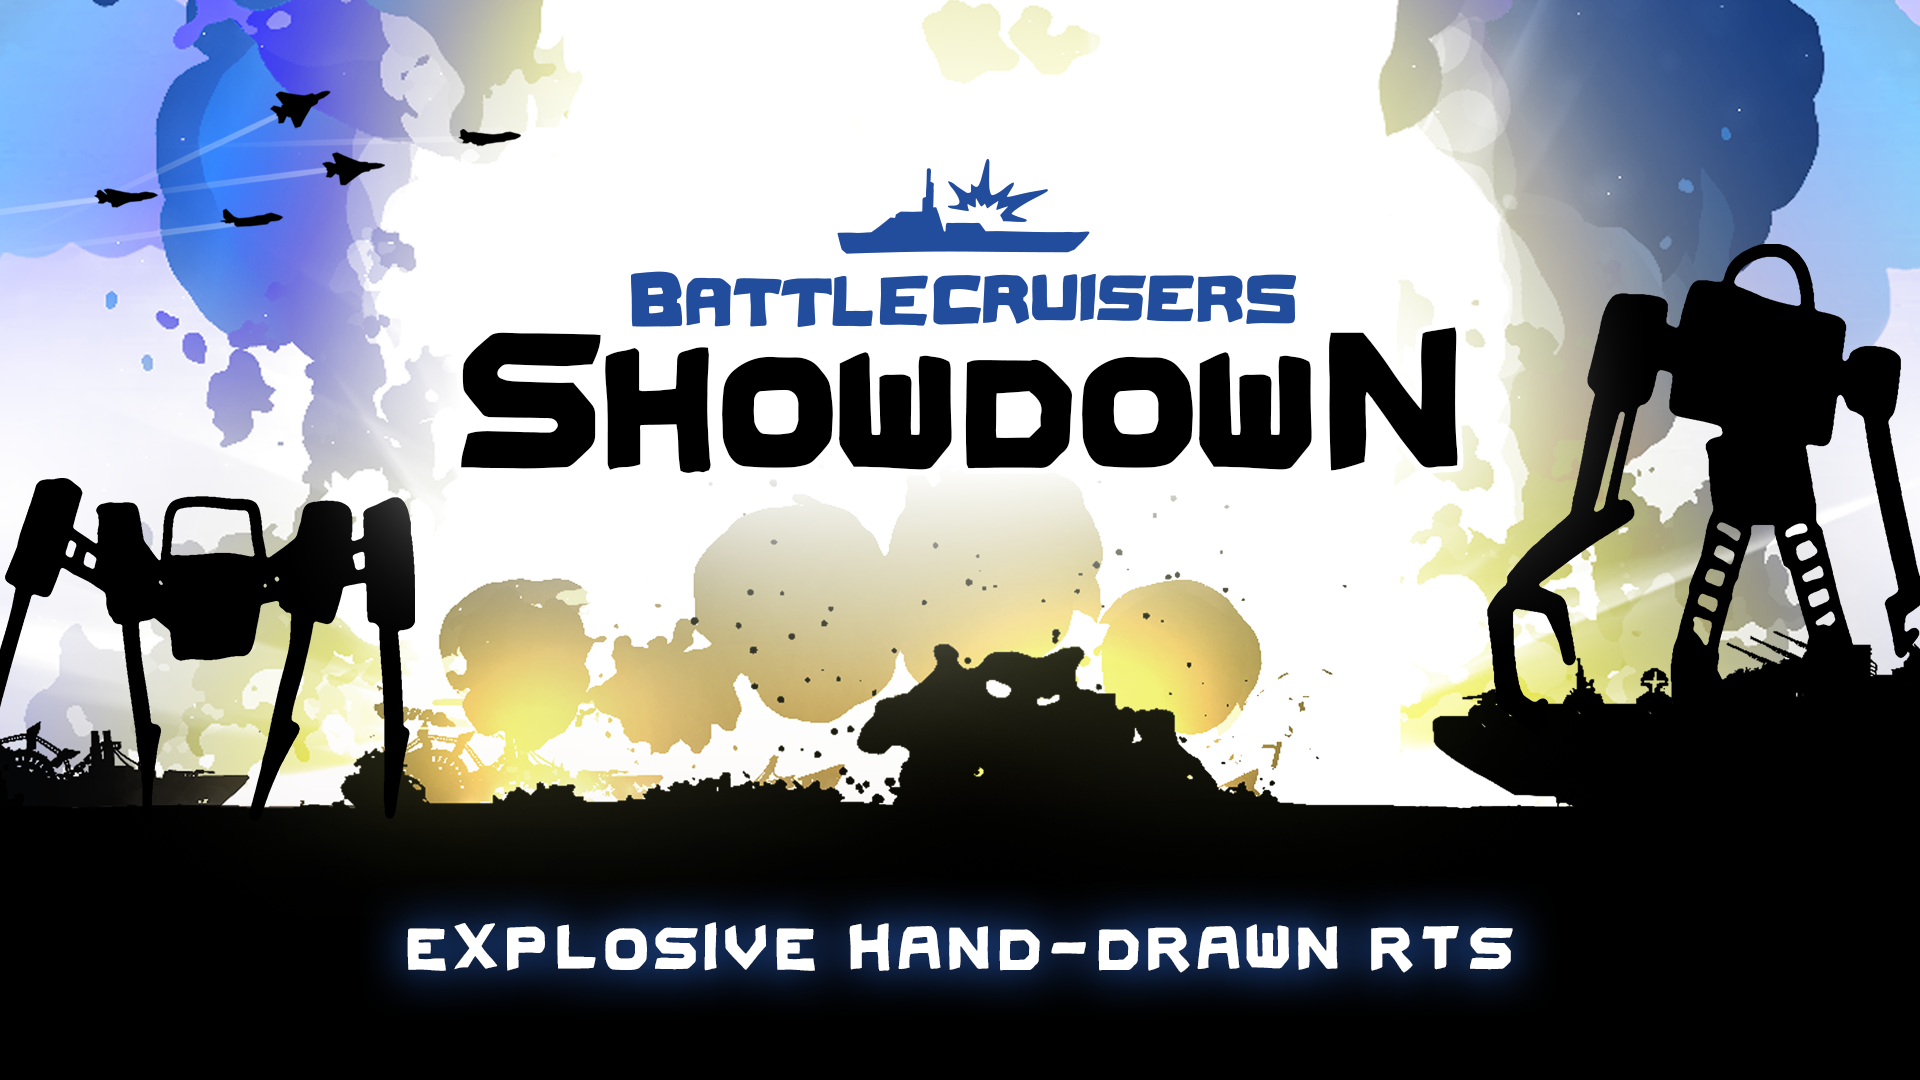 2D Naval RTS BattleCruisers has Launched on PC, Mobile